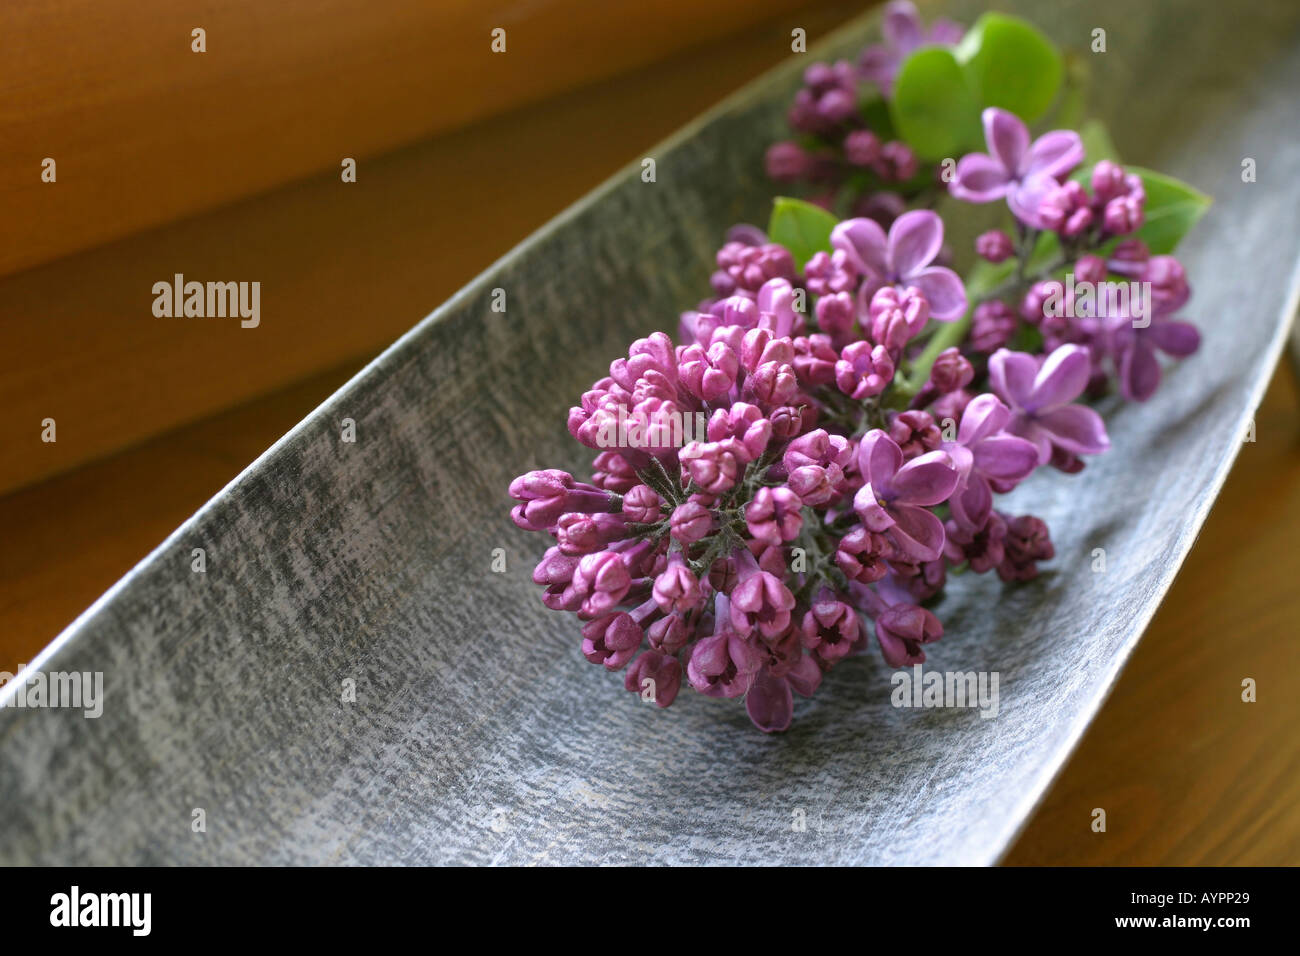 A bunch of lilac placed on a metallic tray Stock Photo